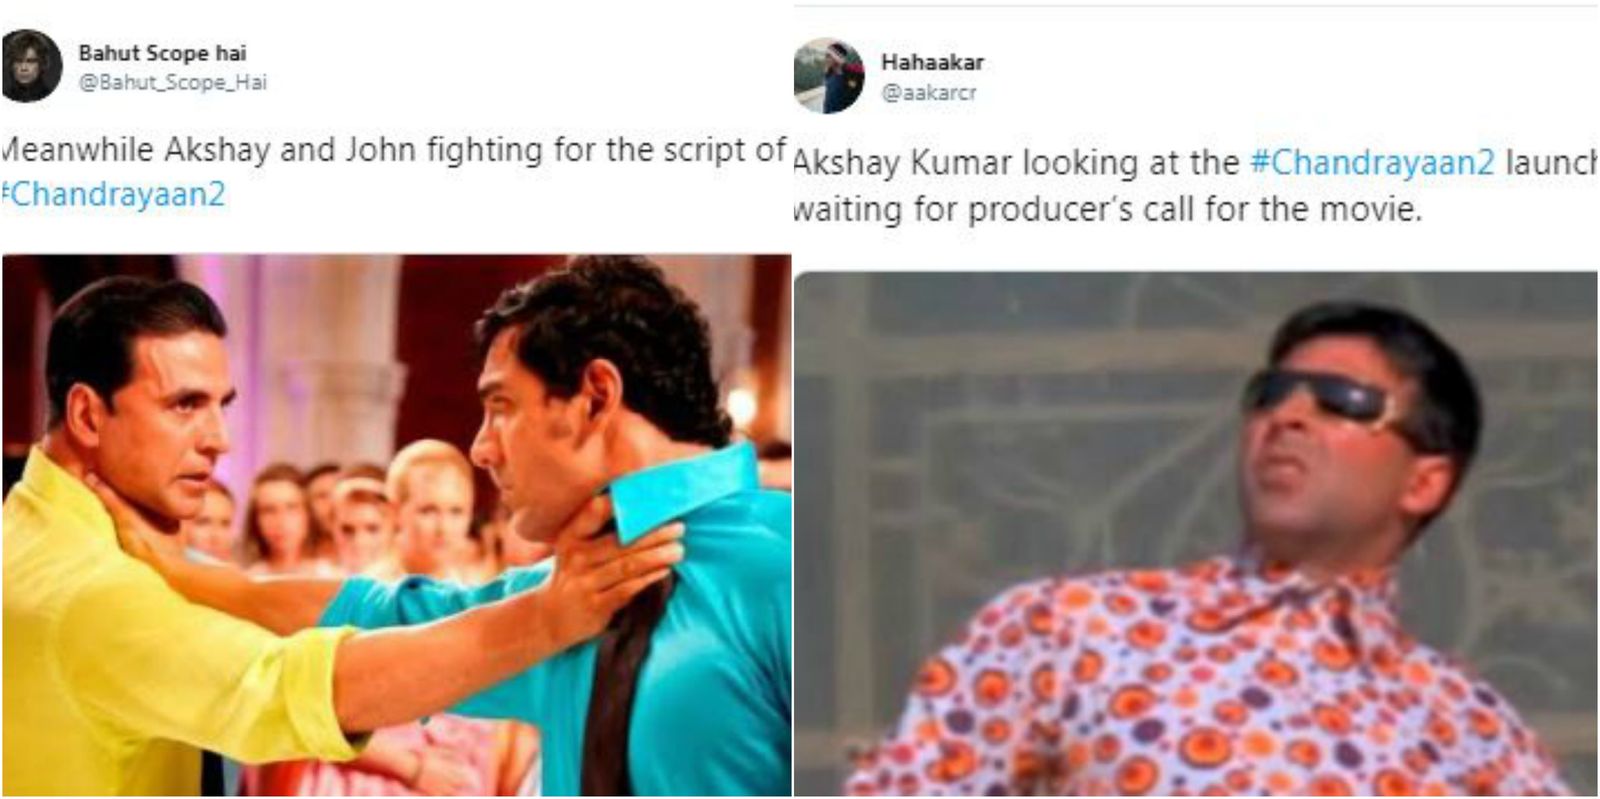 ISRO Just Launched Chandrayan 2 And Akshay Kumar Landed Up In Twitter Memes